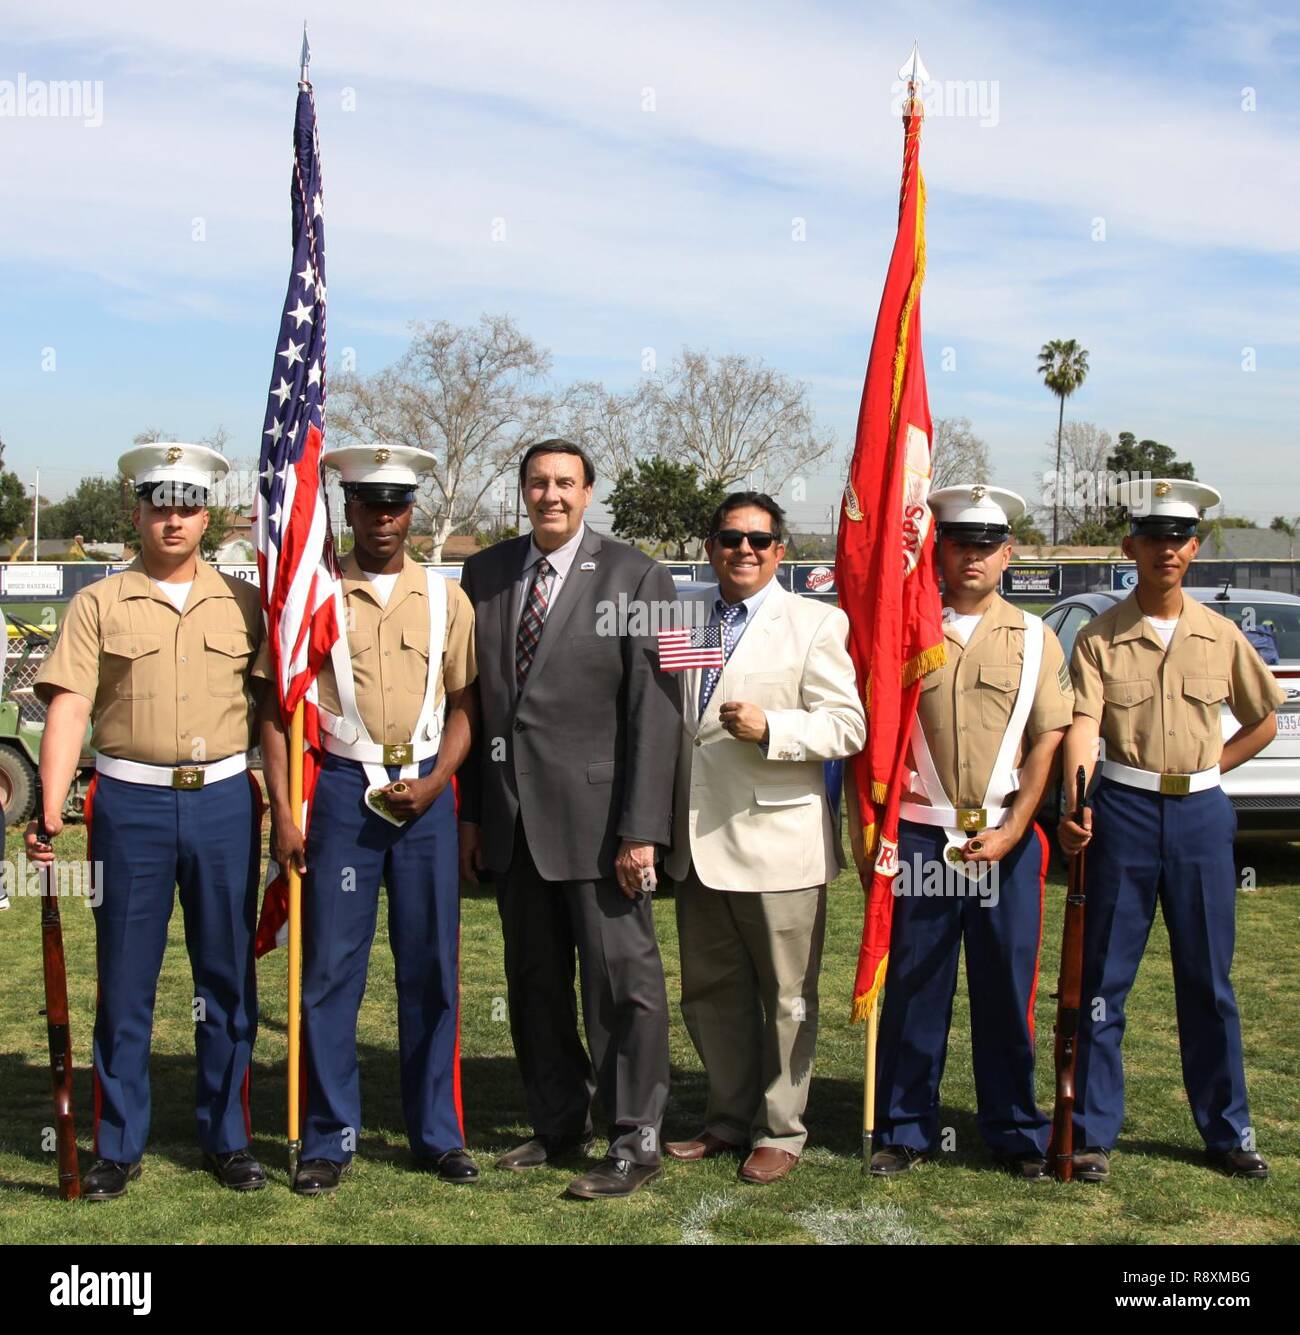 Left to right, Marine Corps Recruiters Sgt. Elijah Gable, Sgt. Derrick Berrian, the Honorable Dan Koops, Mayor of Bellflower, Calif., David Mestas, religious studies educator of St. John Bosco High School, Sgt. Victor Romualdo and LCpl. Ulixes Hernandez, pose during a varsity baseball game at St. John Bosco High School, Bellflower, Calif., March 14, 2017. Coming from Recruiting Substation Lakewood, the recruiters were the official color guard for the game. Stock Photo